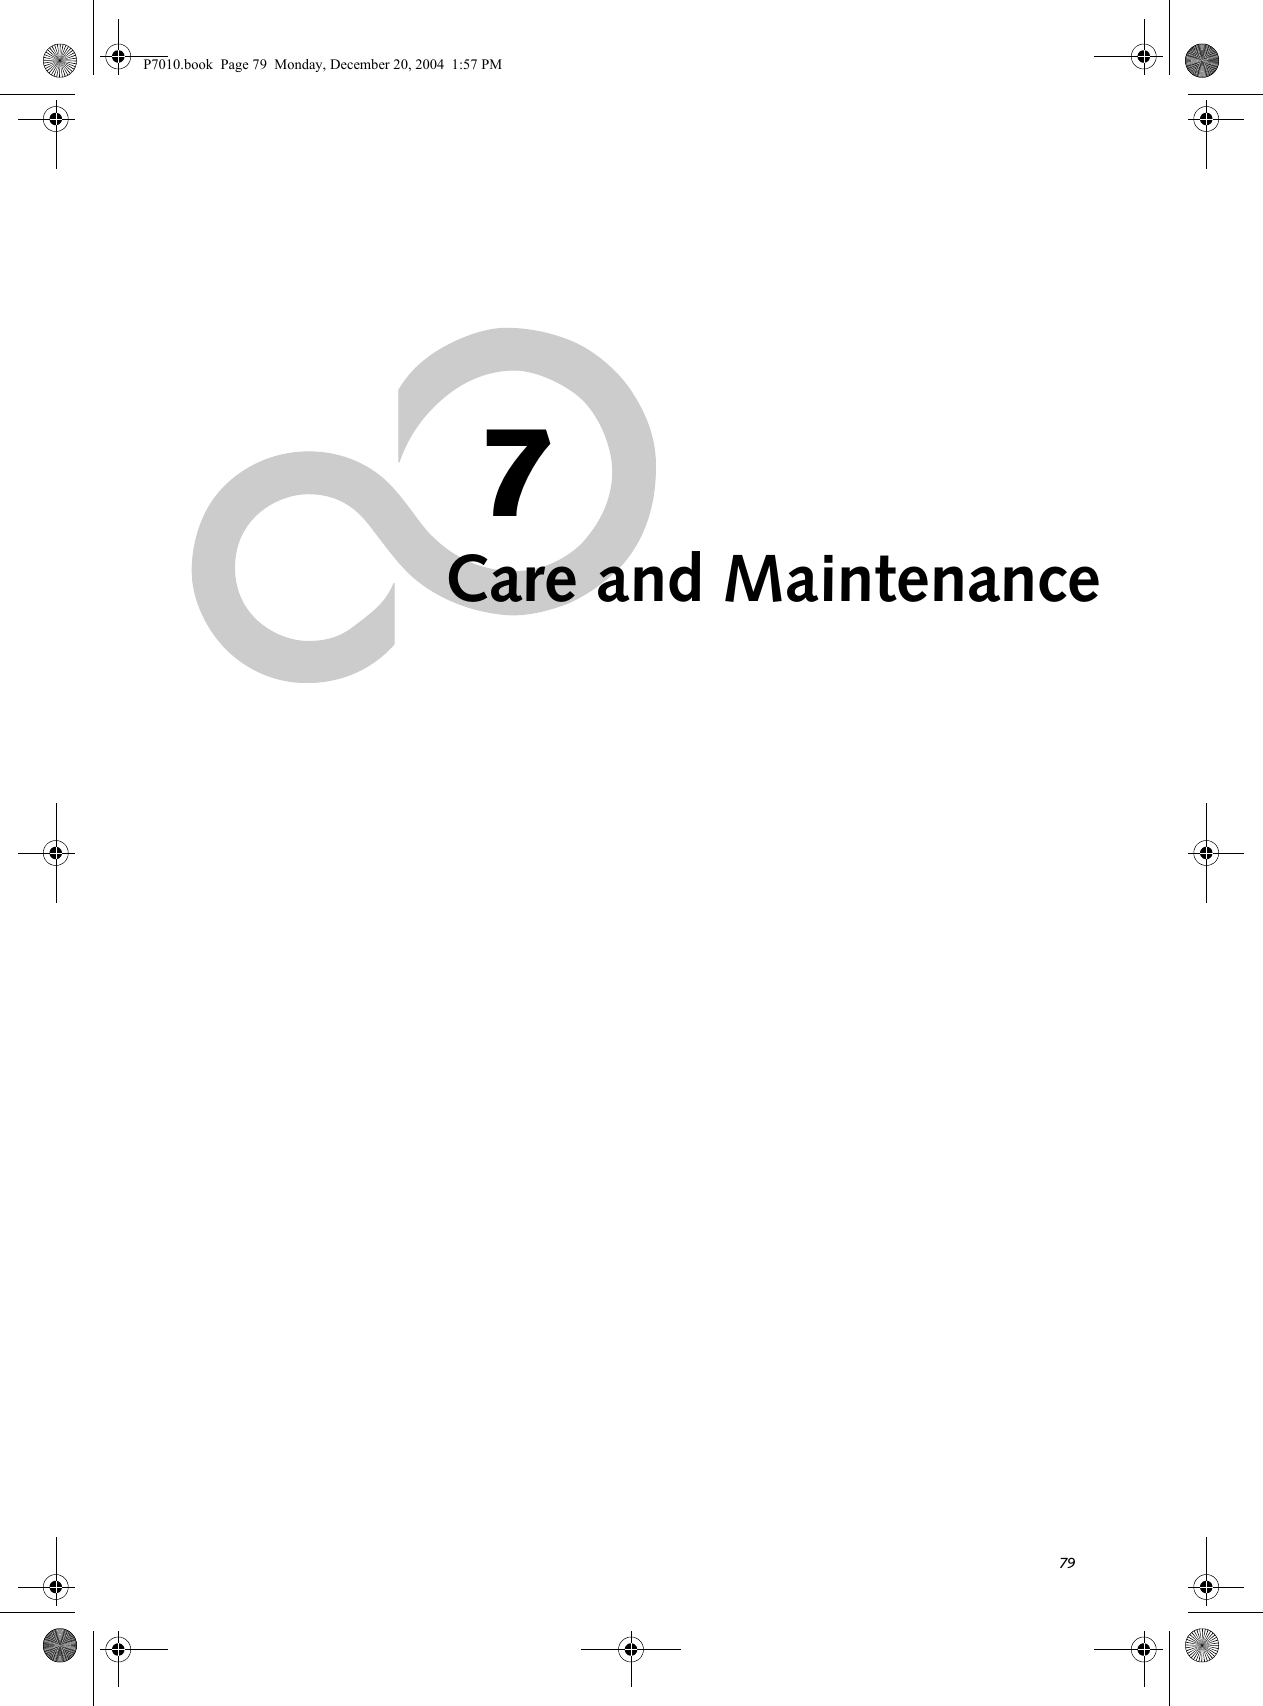 797Care and MaintenanceP7010.book  Page 79  Monday, December 20, 2004  1:57 PM